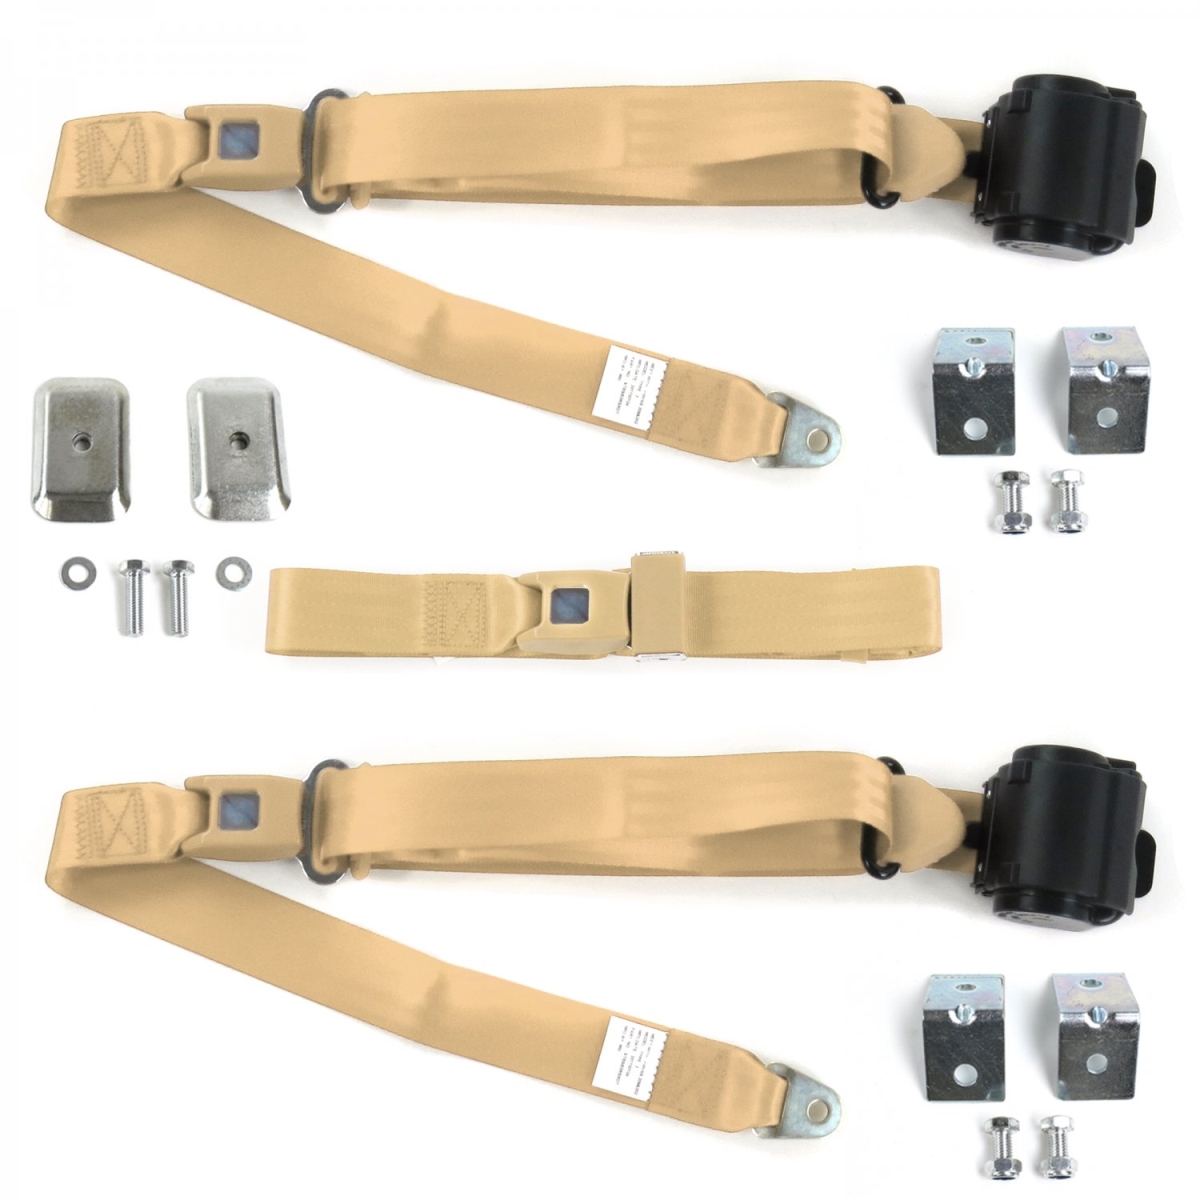 683976 Tan Retractable Bench Seat Belt Kit with Bracketry for 1928-1931 Model A Ford Standard 3 Point - 3 Belts -  safeTboy